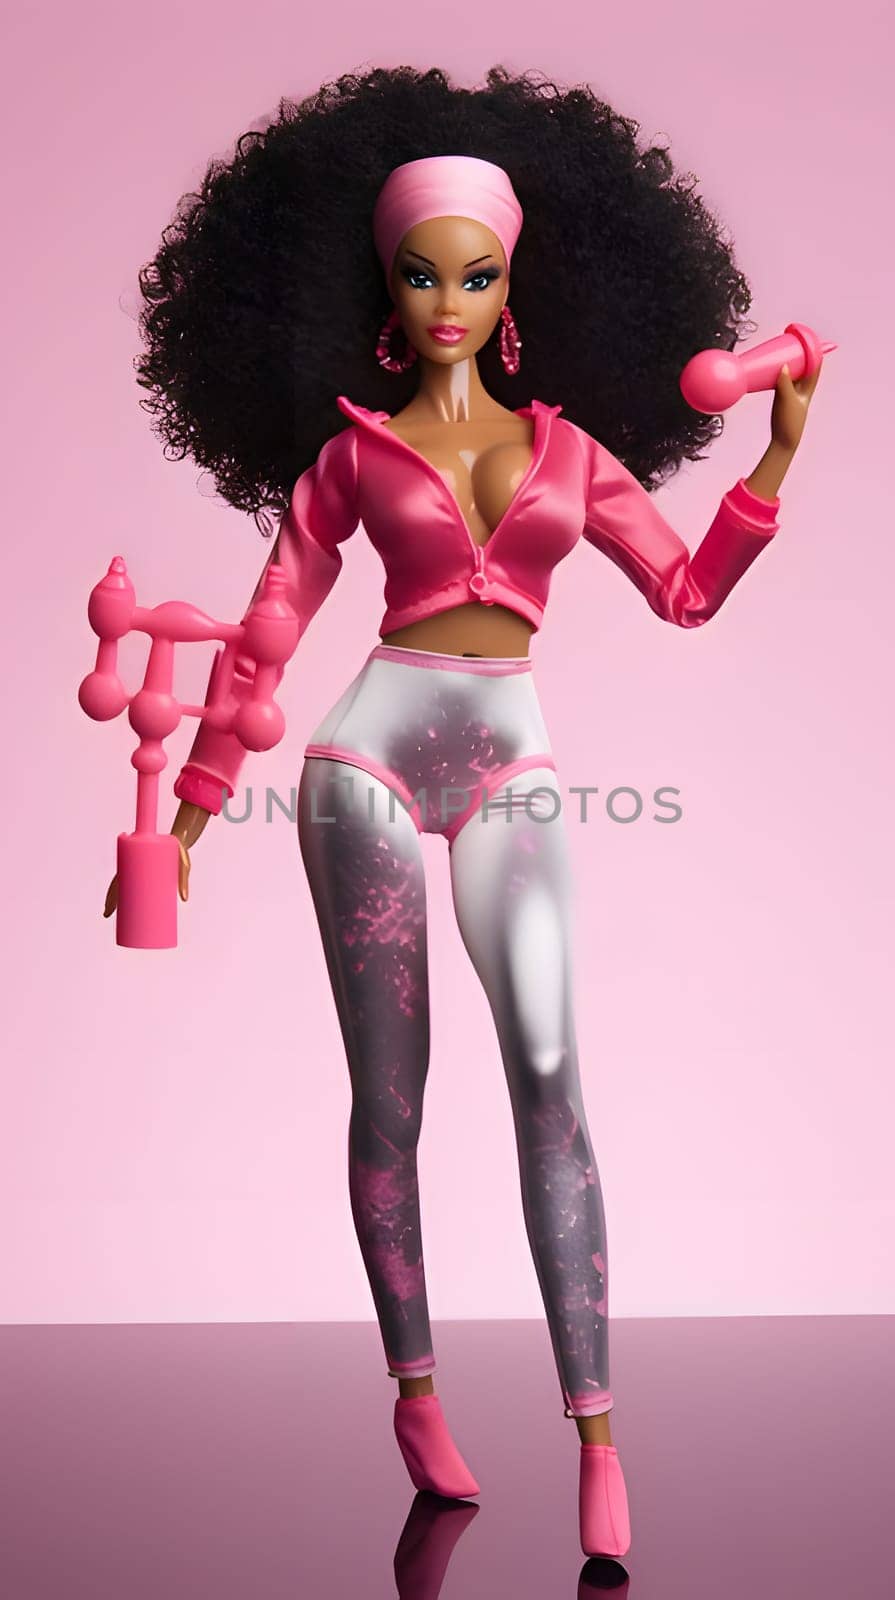 A vertical photo features a black Barbie doll sporting trendy sportswear on a vibrant pink background, exuding confidence and style.